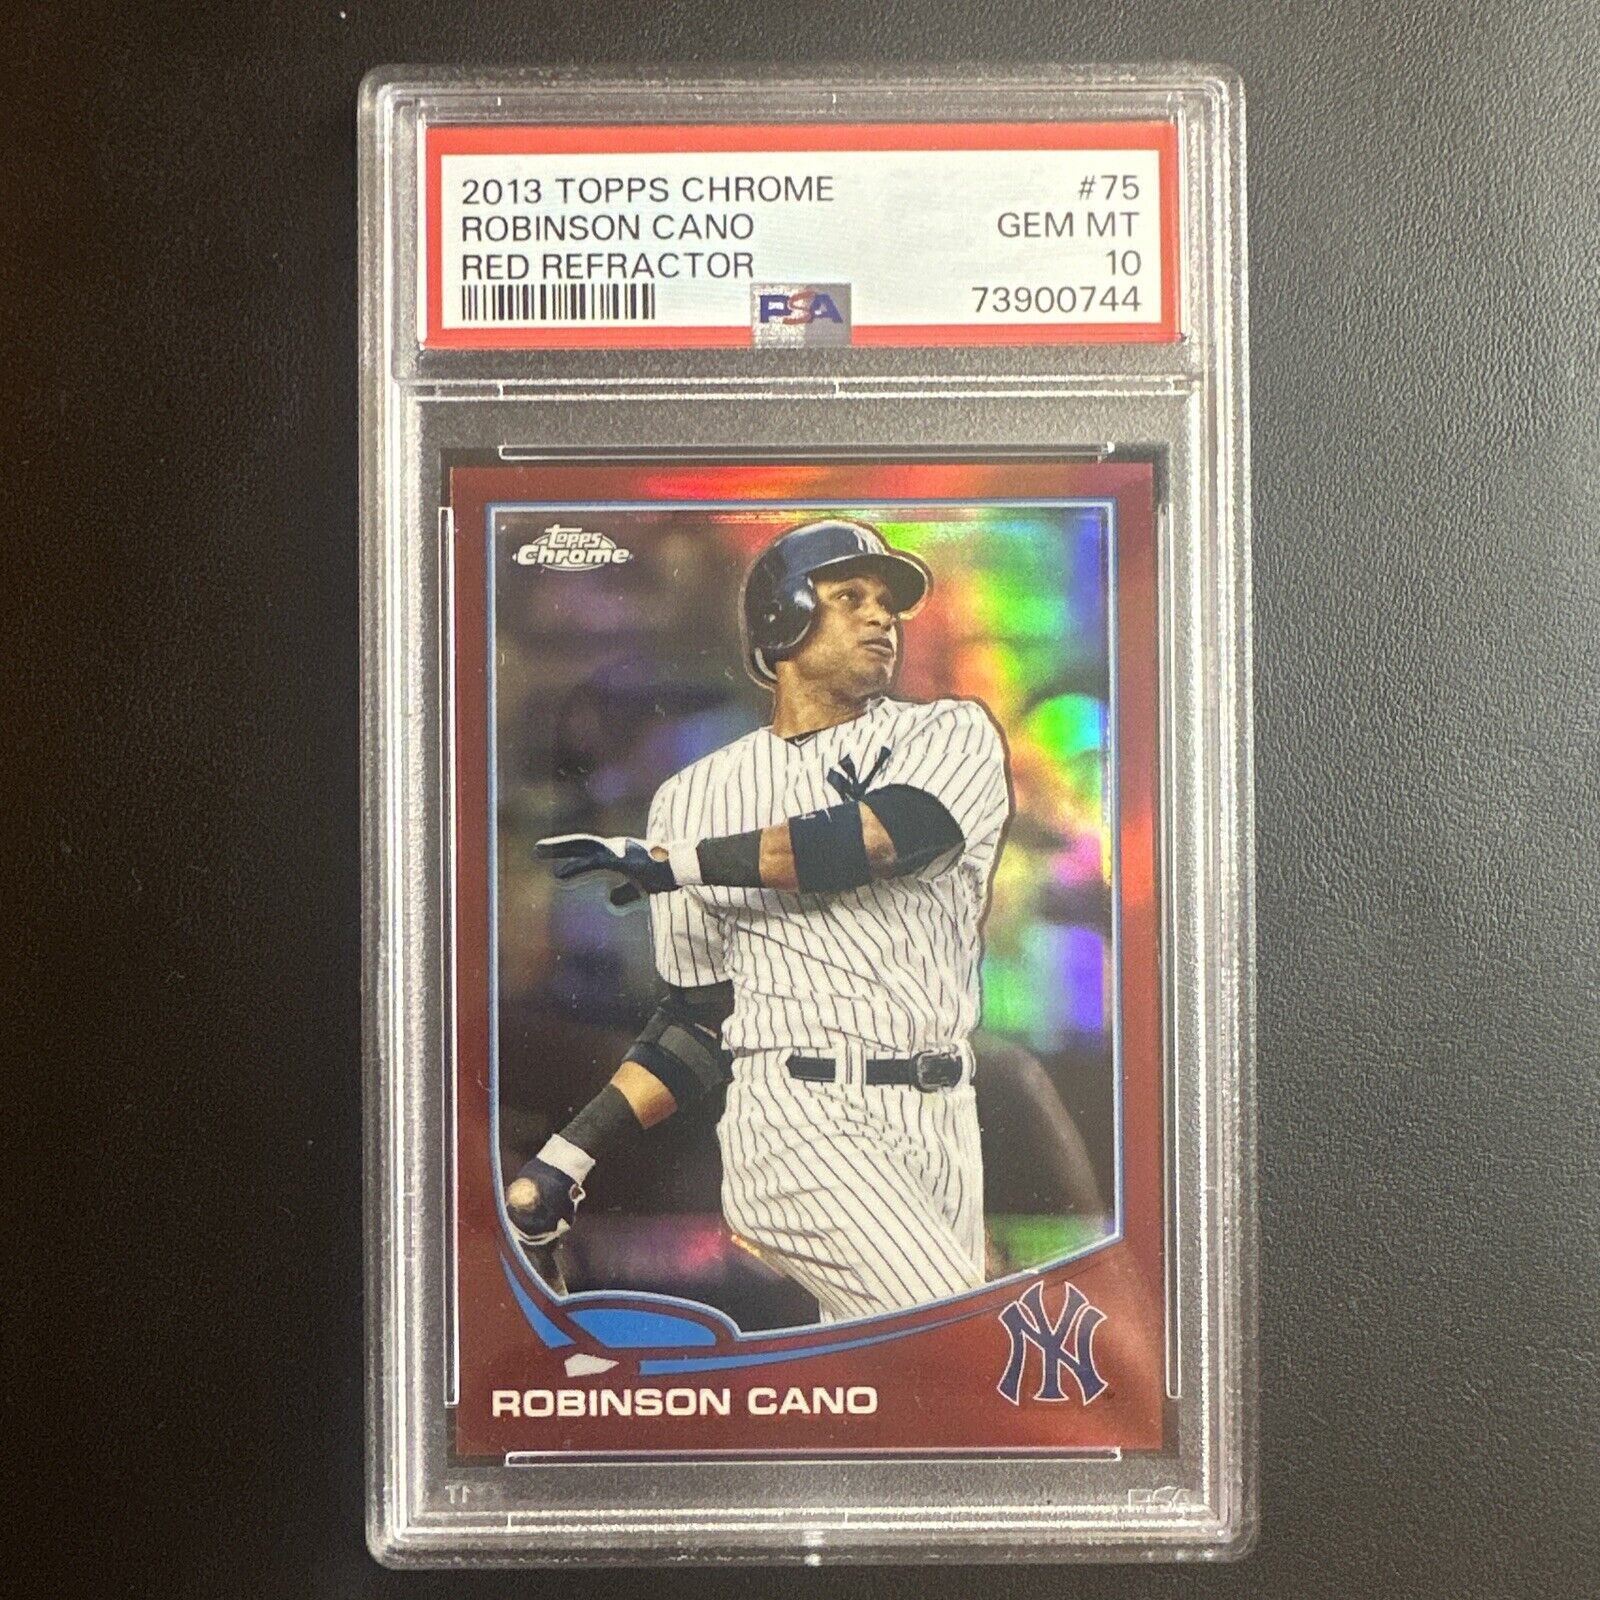 2013 Topps Chrome Robinson Cano Red Refractor PSA 10 20/25